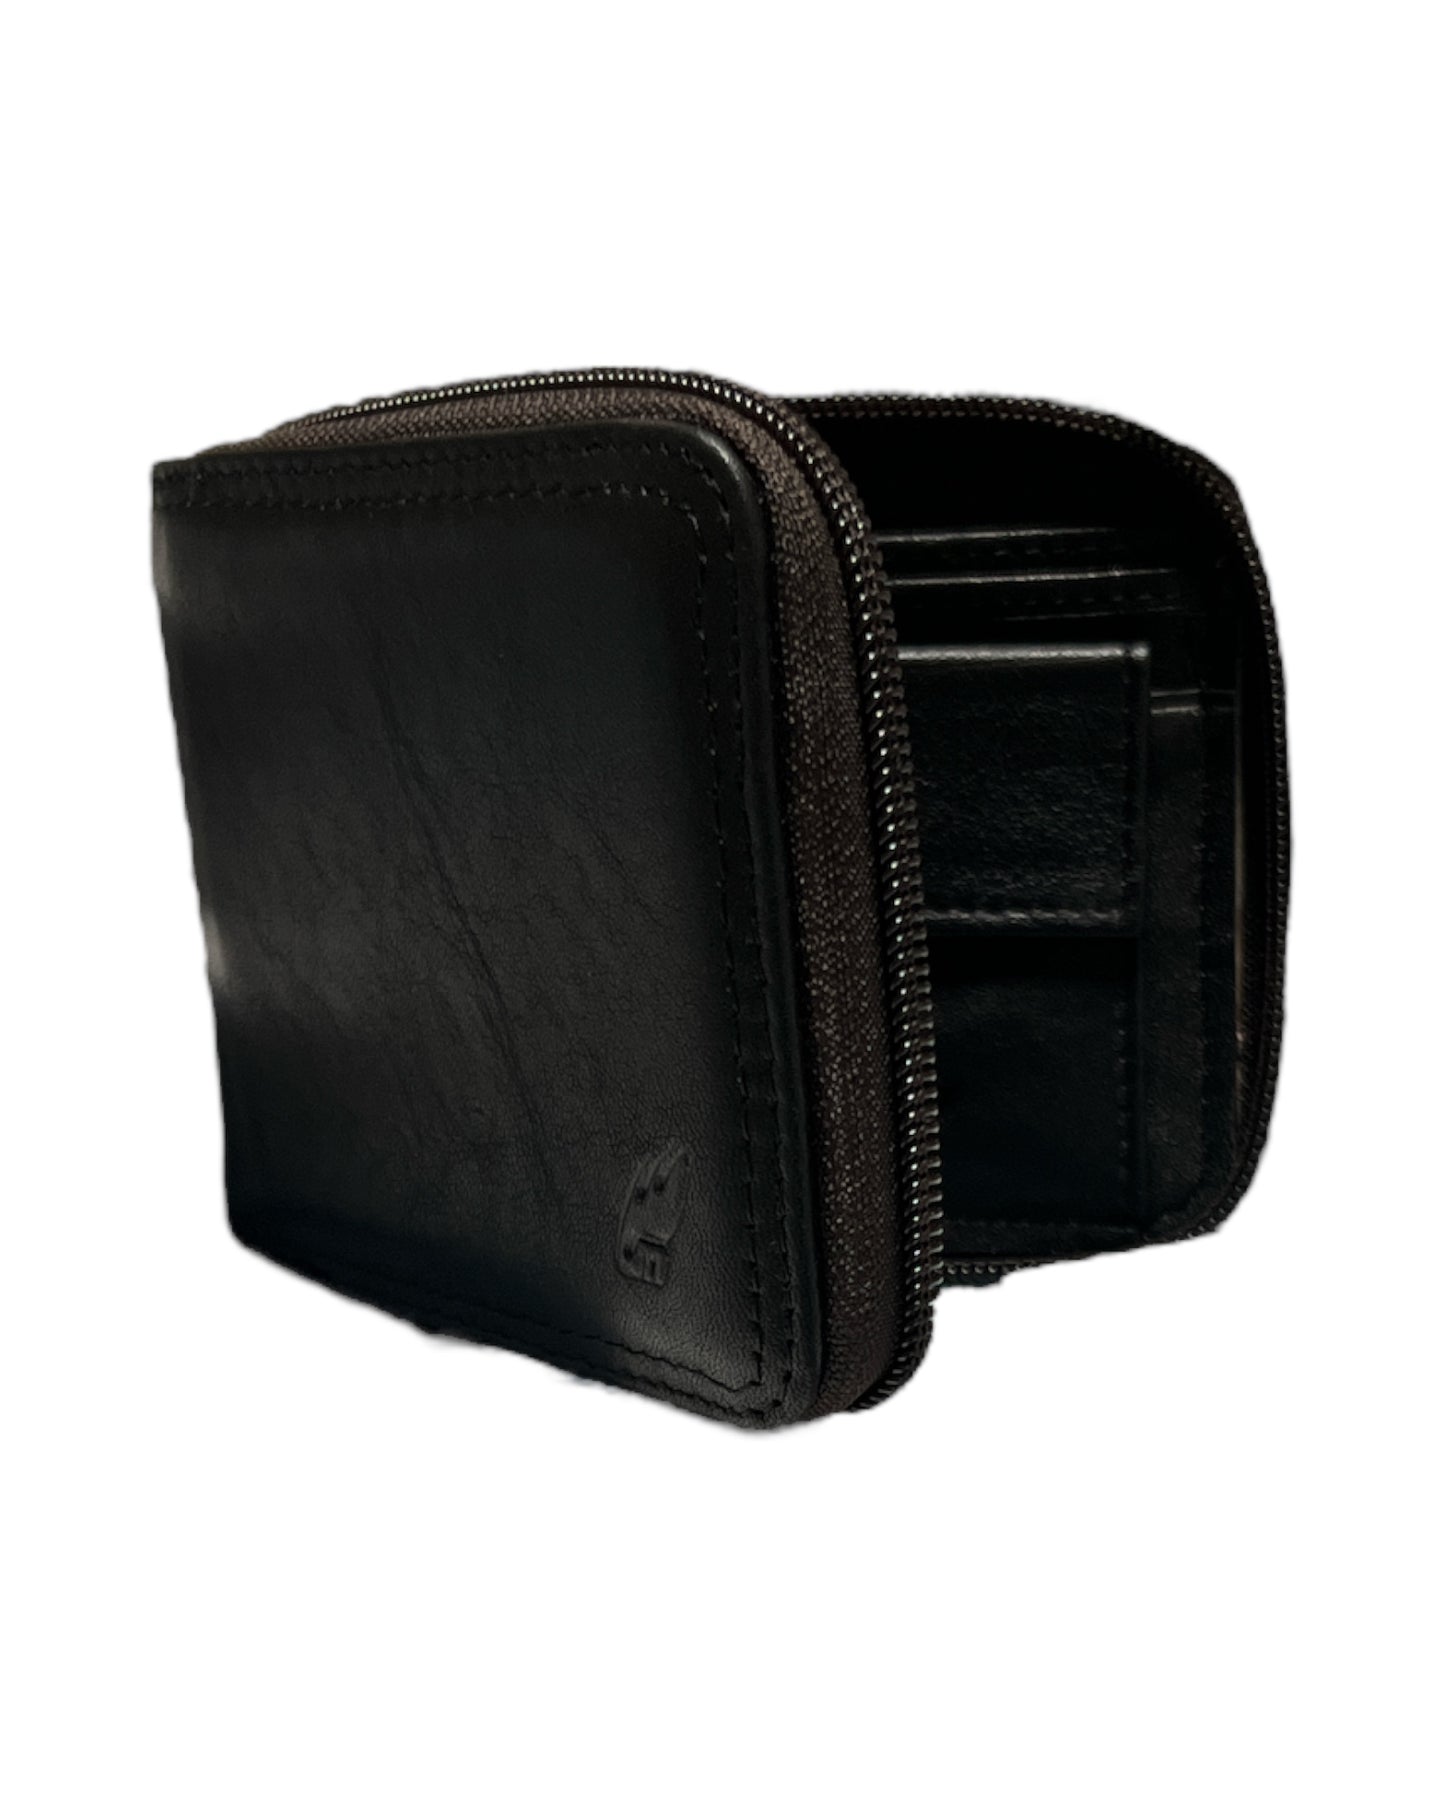 Men's Wallet - Genuine Leather - Style 3